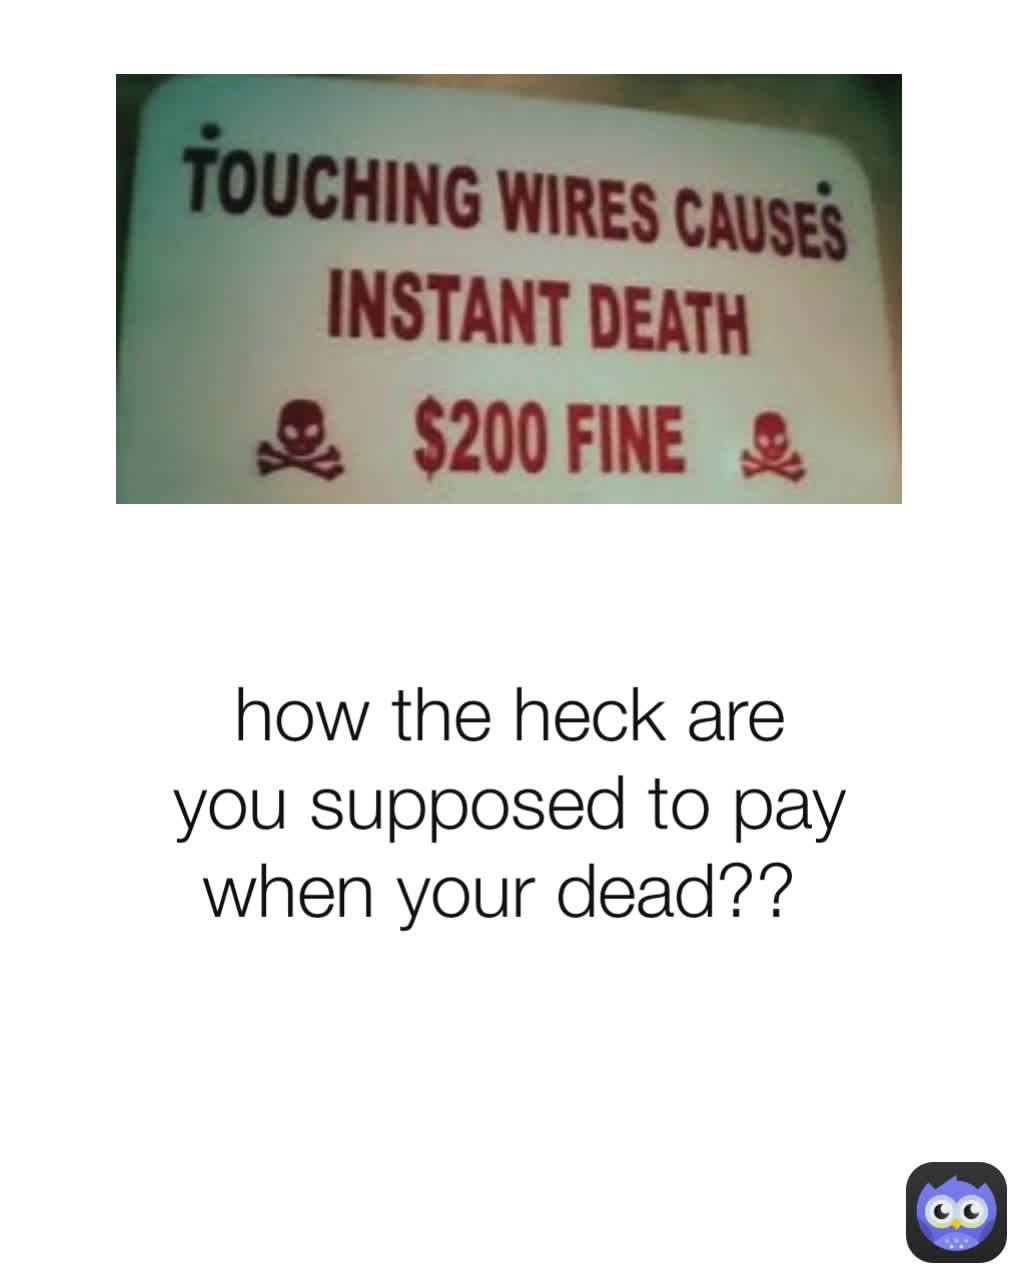 how the heck are you supposed to pay when your dead?? 